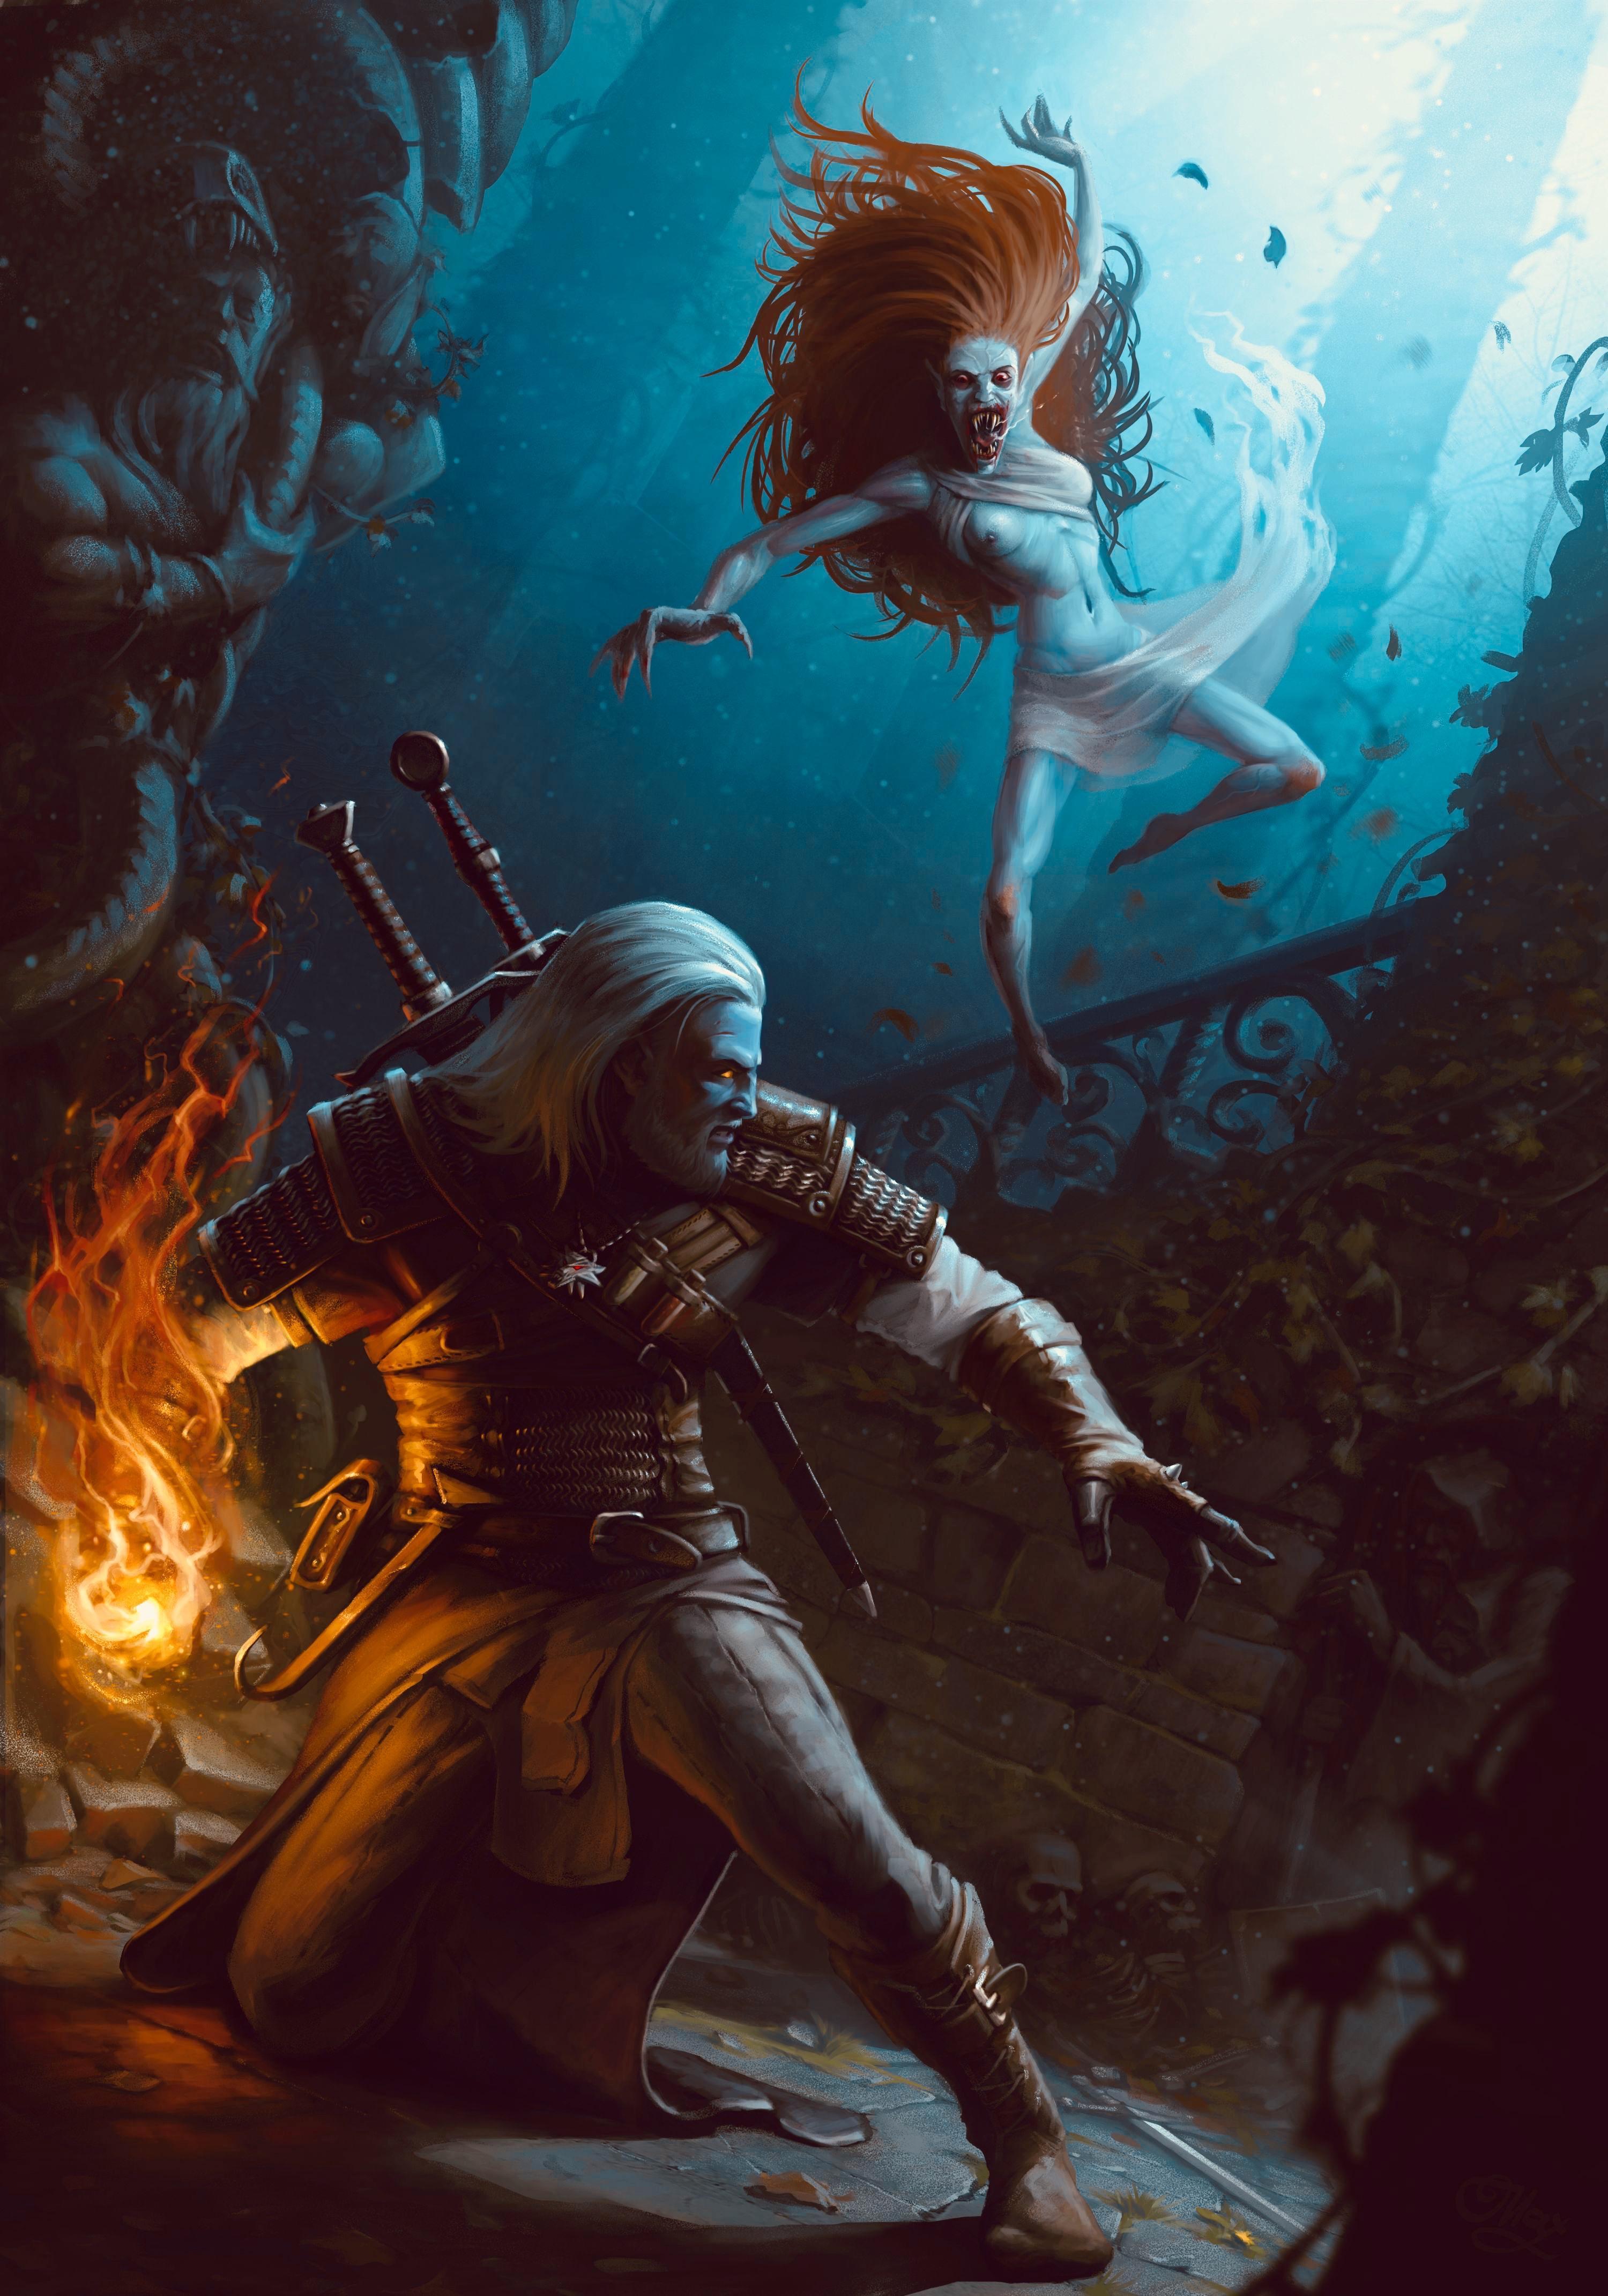 Witcher Iphone Wallpapers Top Free Witcher Iphone Backgrounds Wallpaperaccess